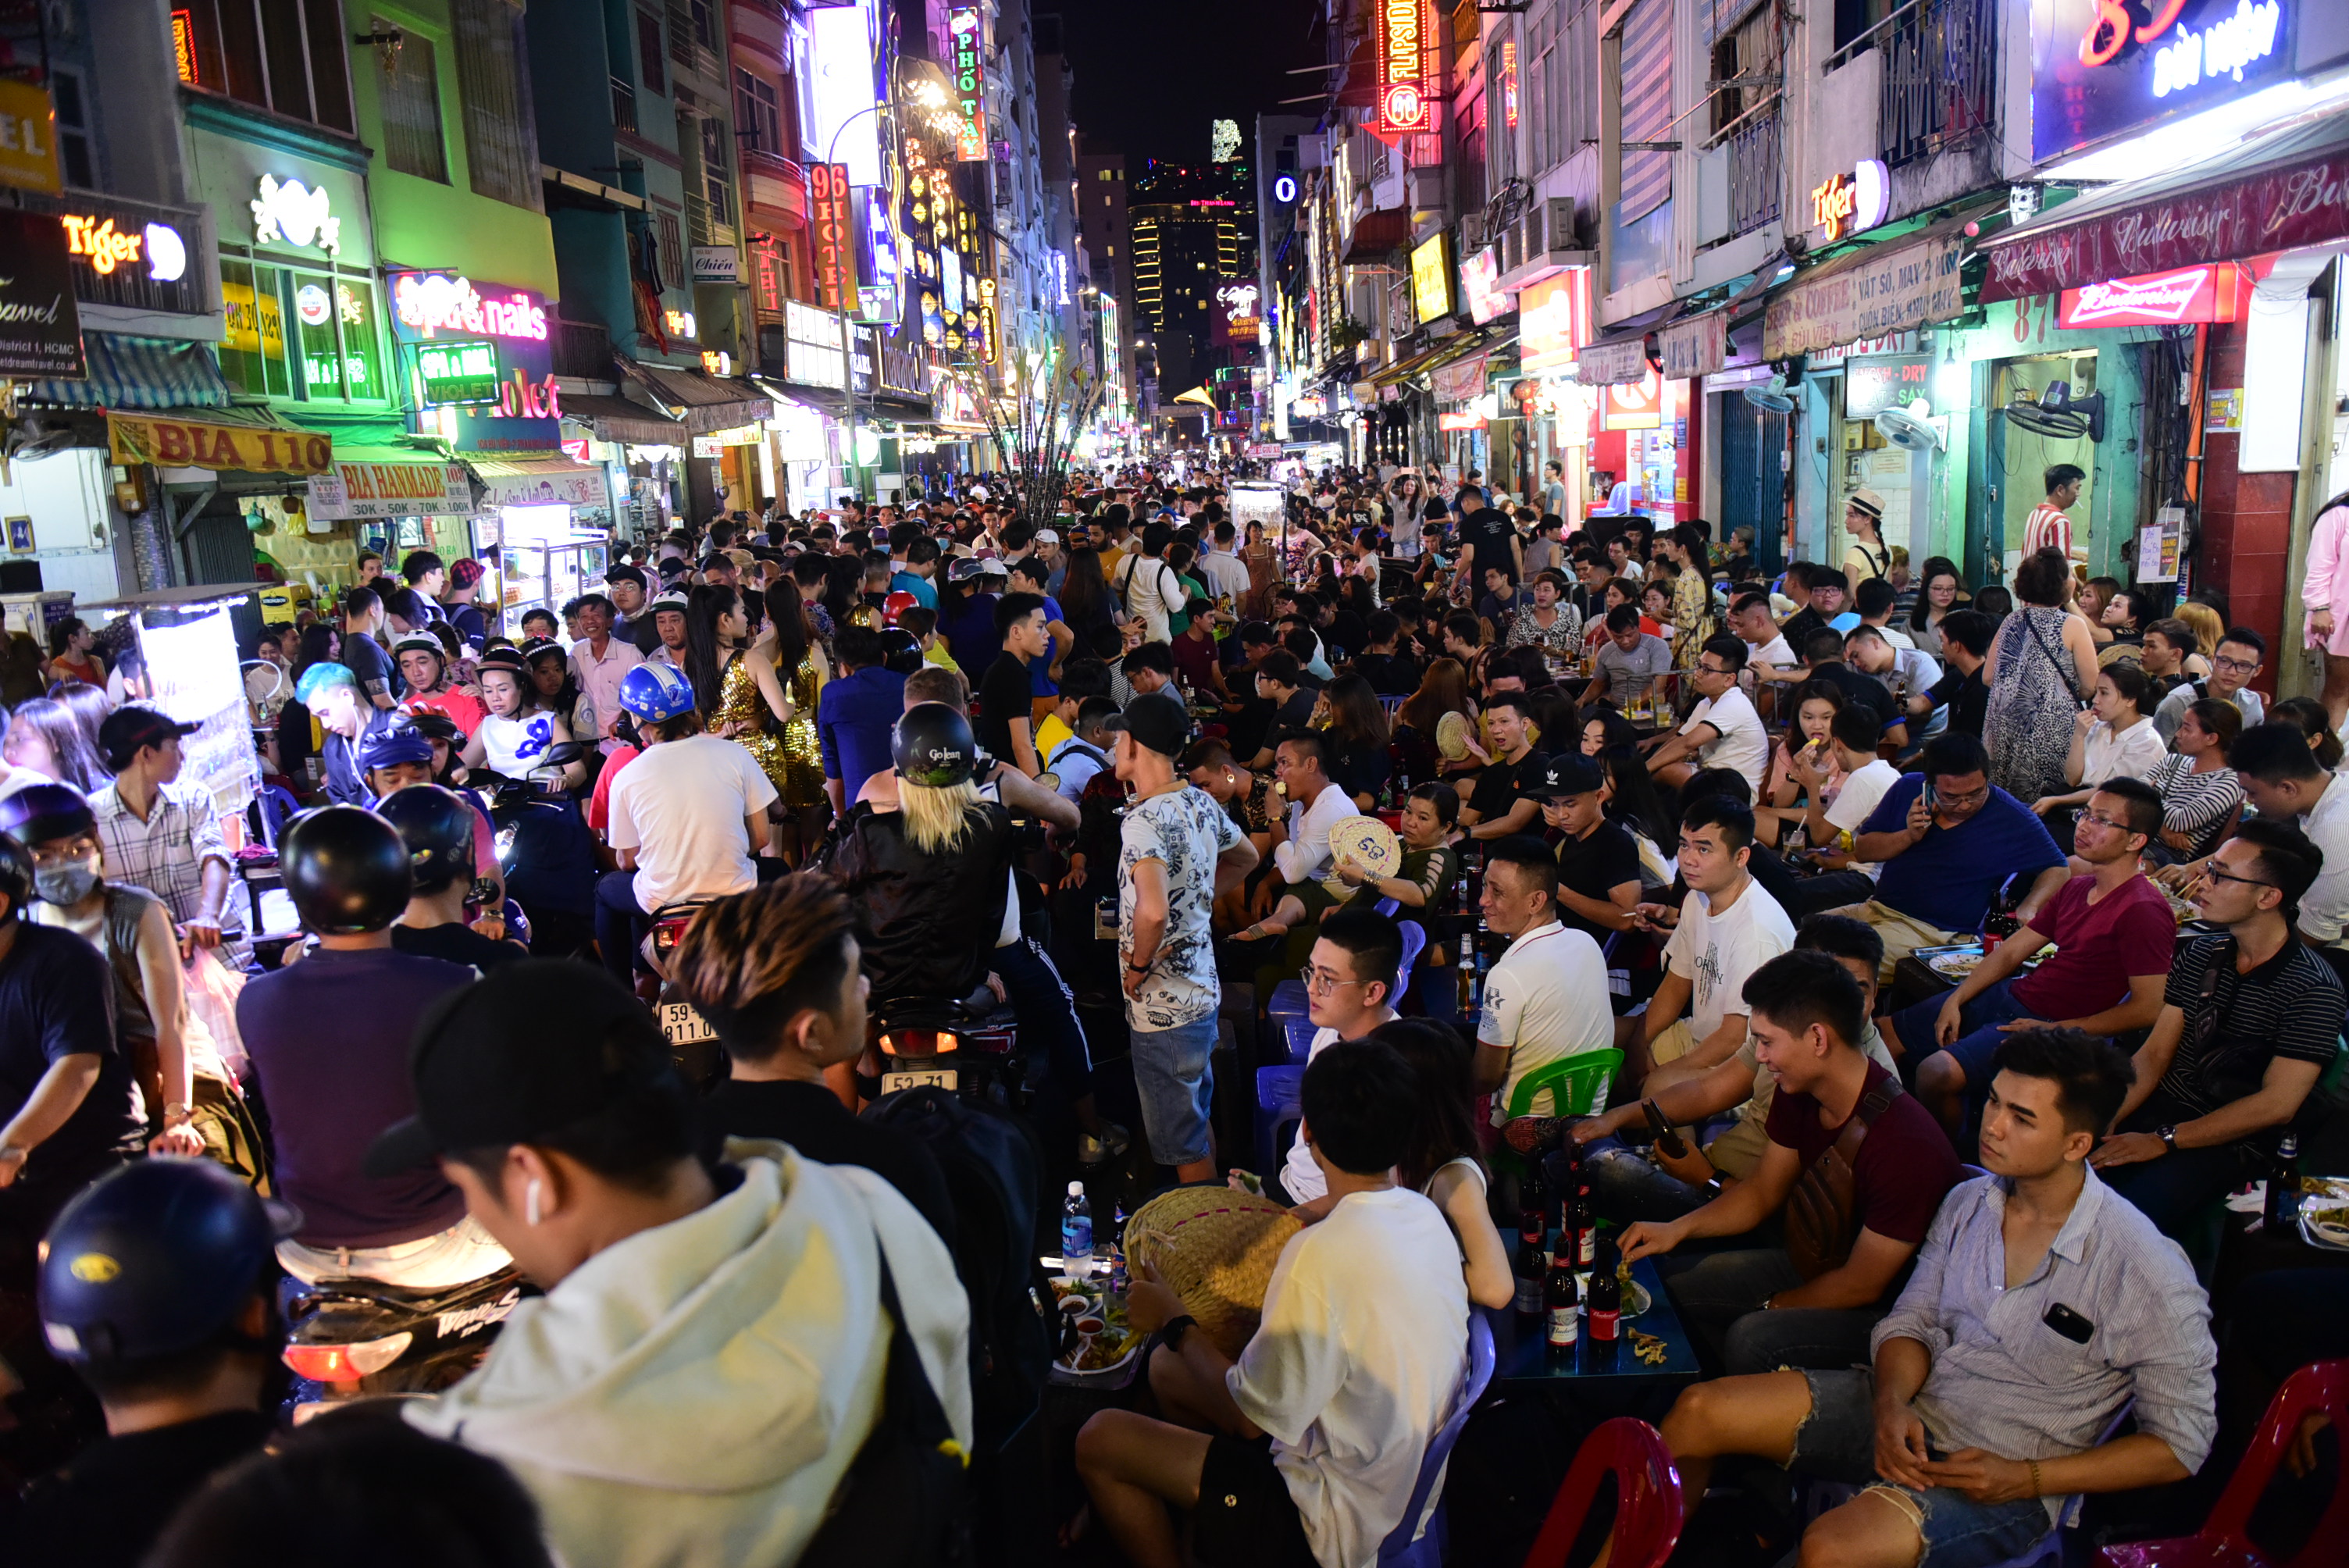 Bui Vien Street in Ho Chi Minh City’s District 1 is packed with visitors in a photo taken on a weekday at around 10pm on April 11, 2019. Photo: Quang Dinh / Tuoi Tre